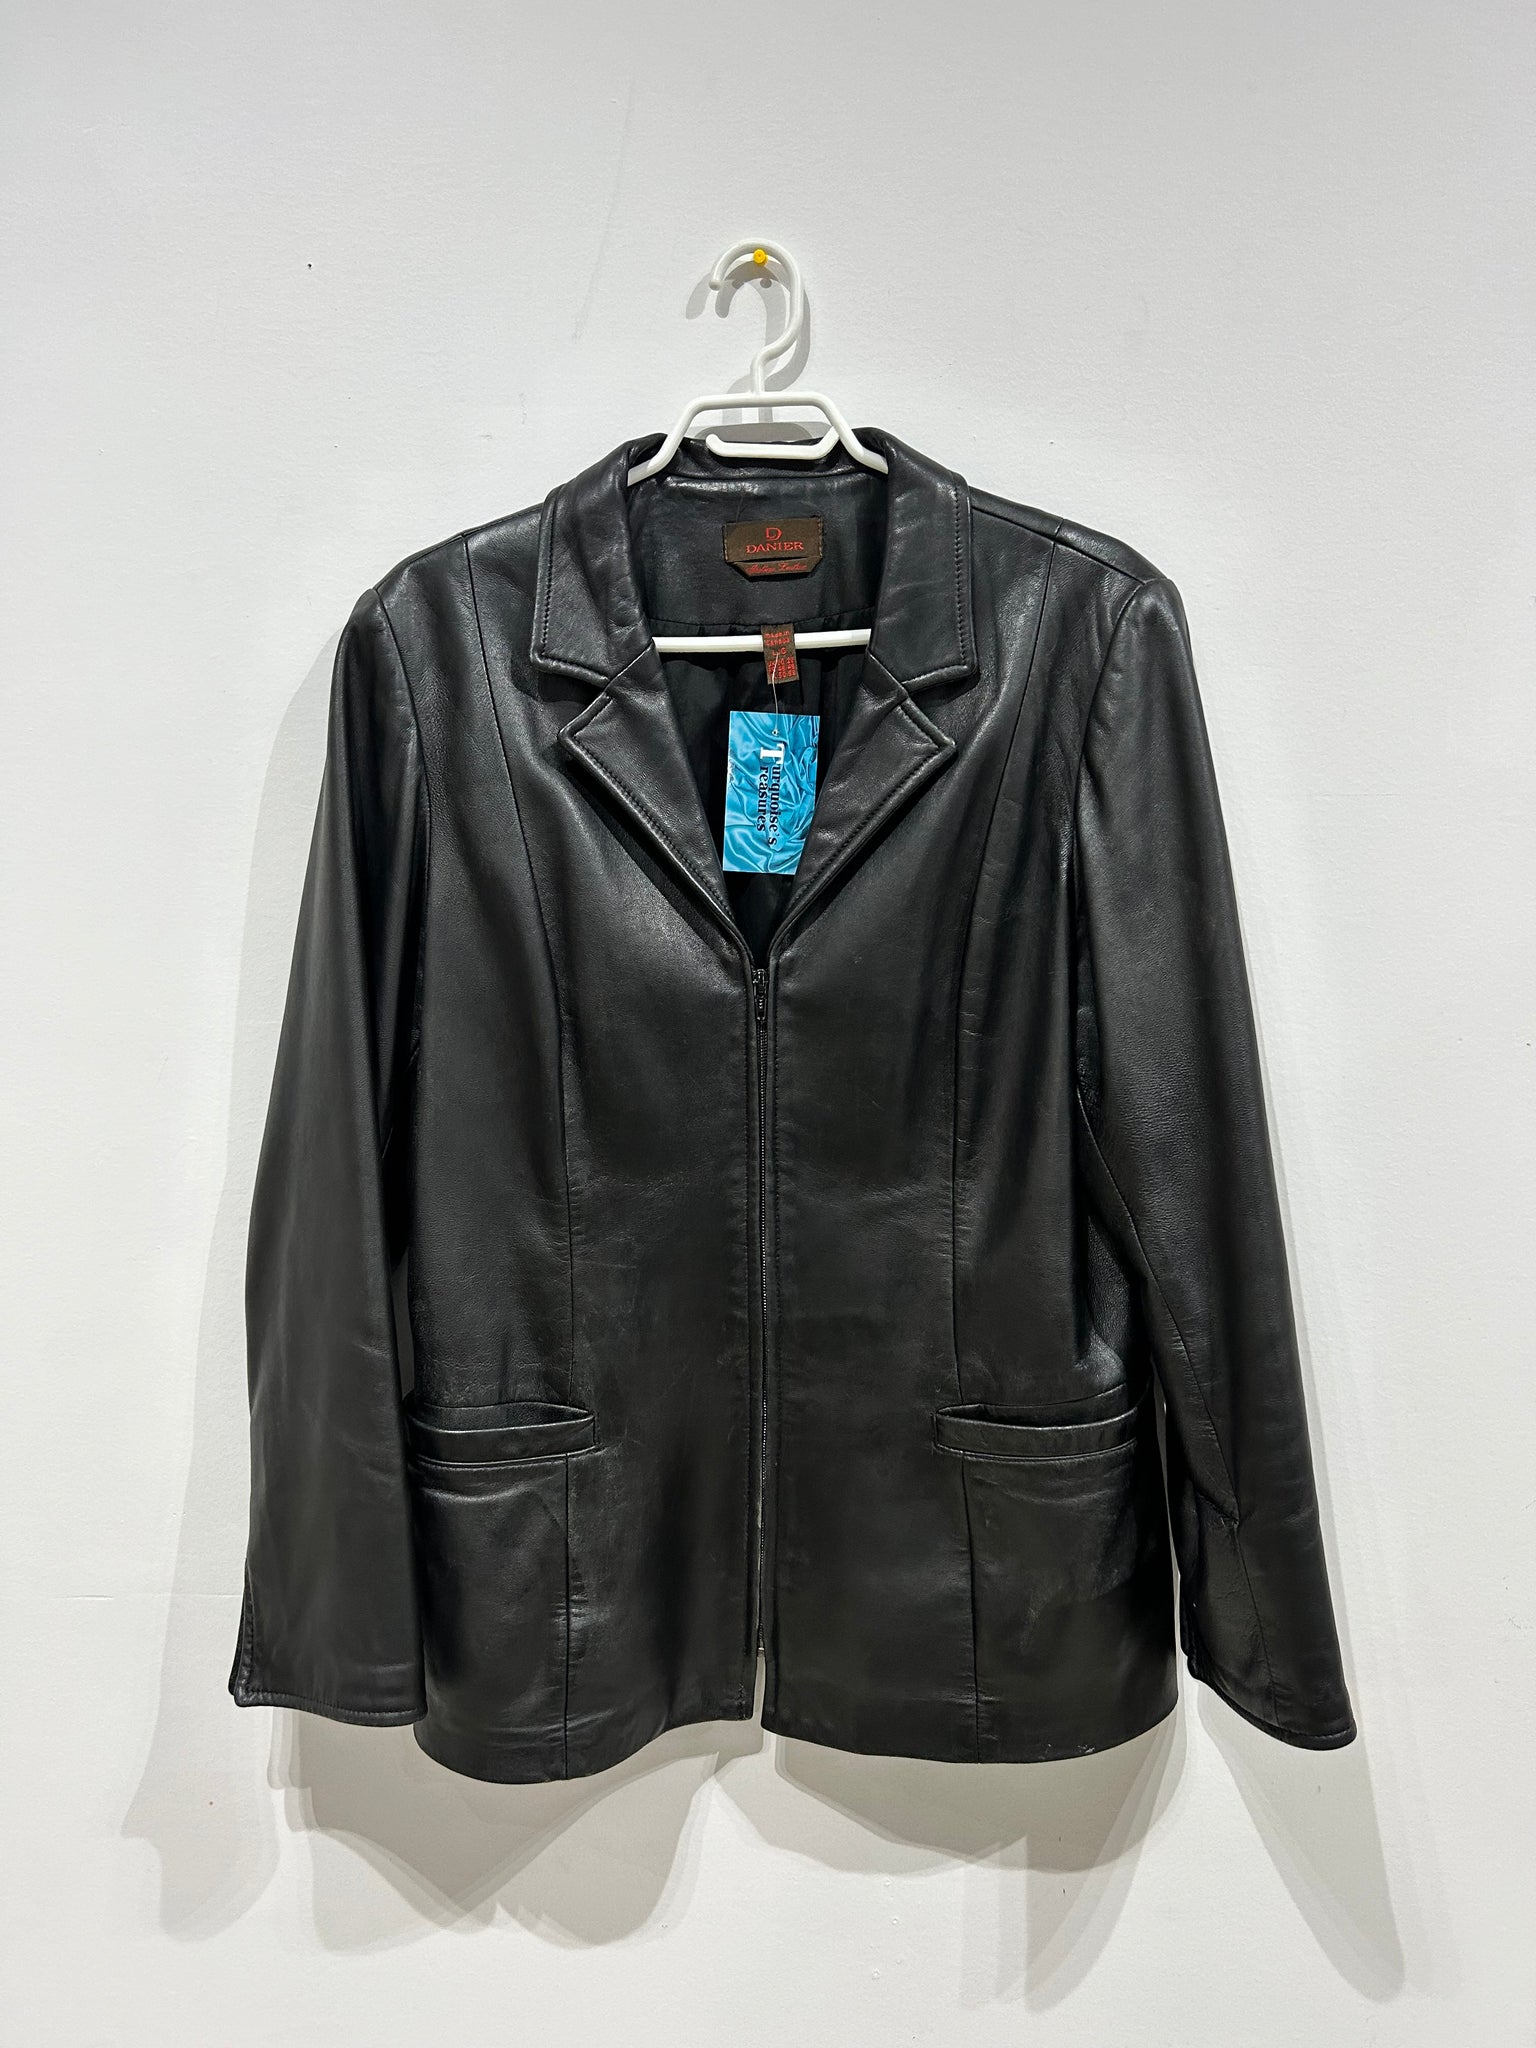 Thrifted vintage & pre-loved genuine leather jackets